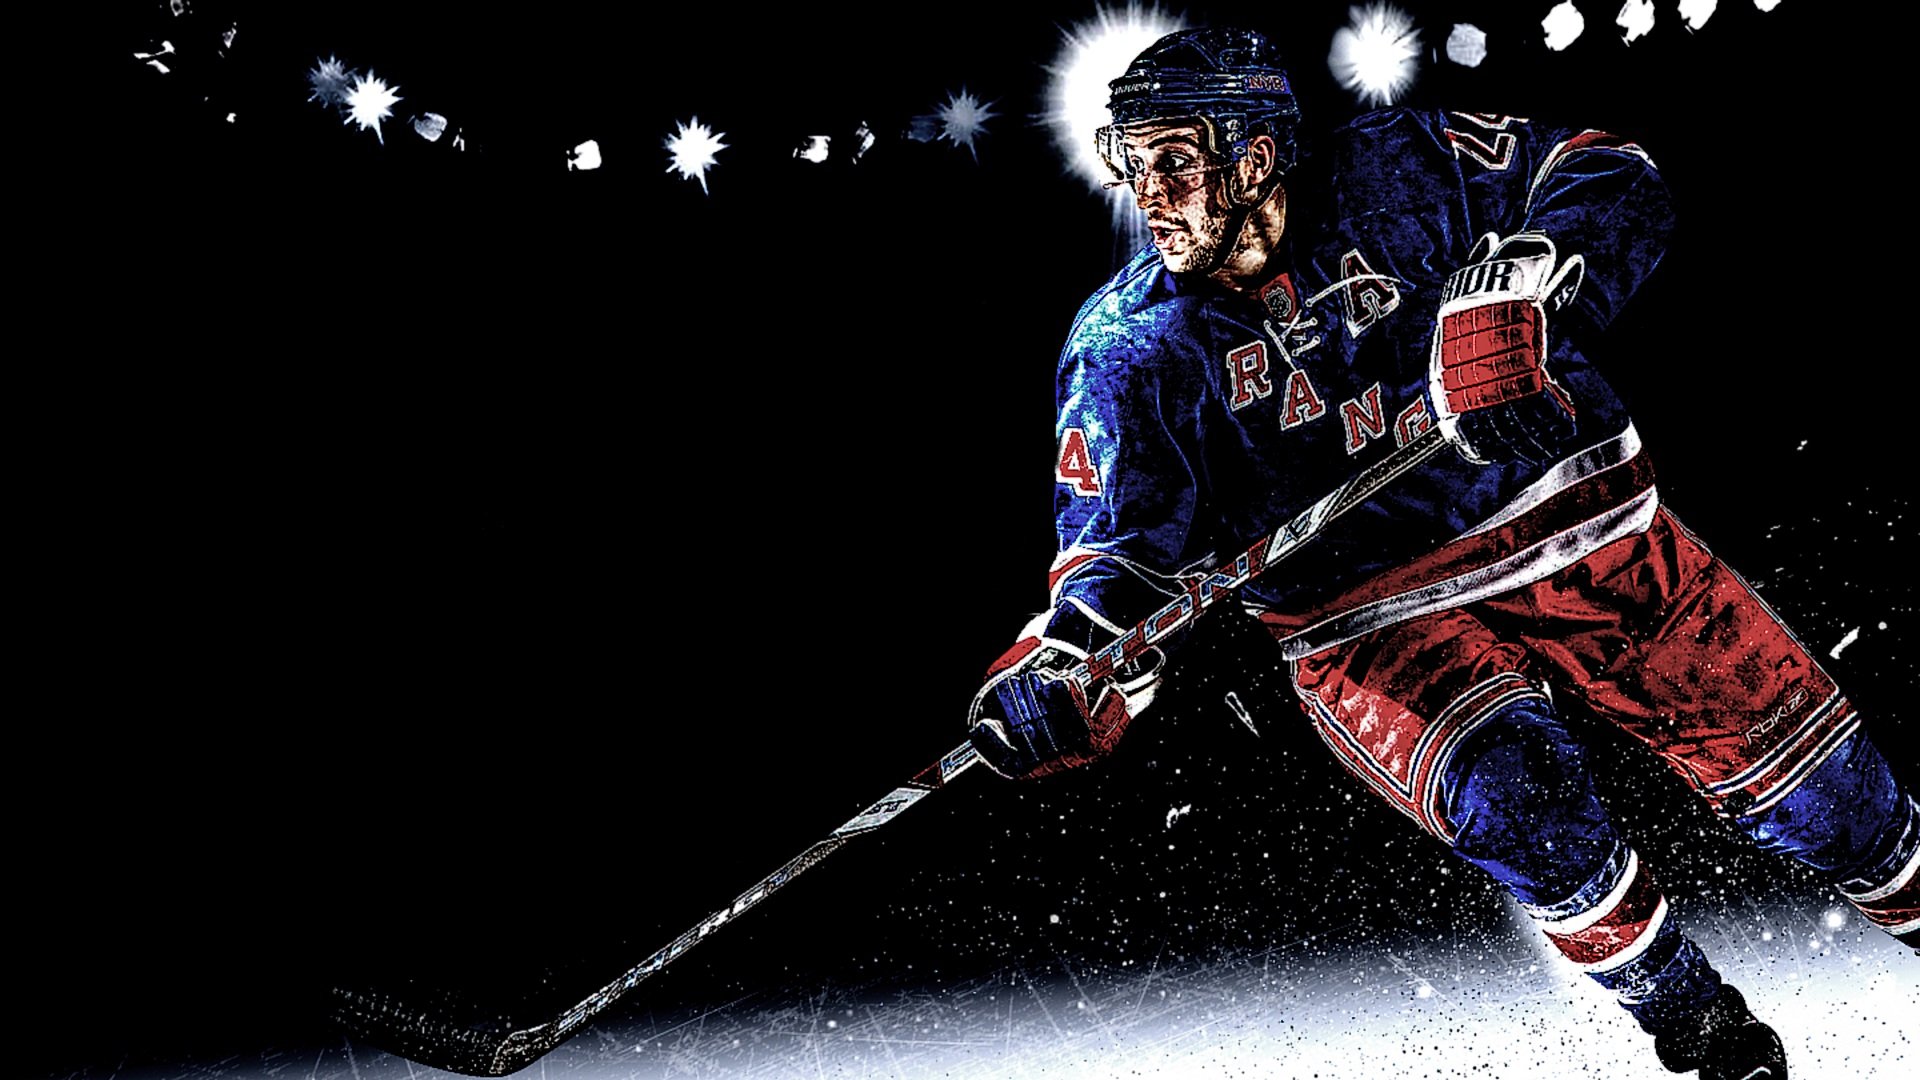 New York Rangers wallpapers New York Rangers background   Page 2